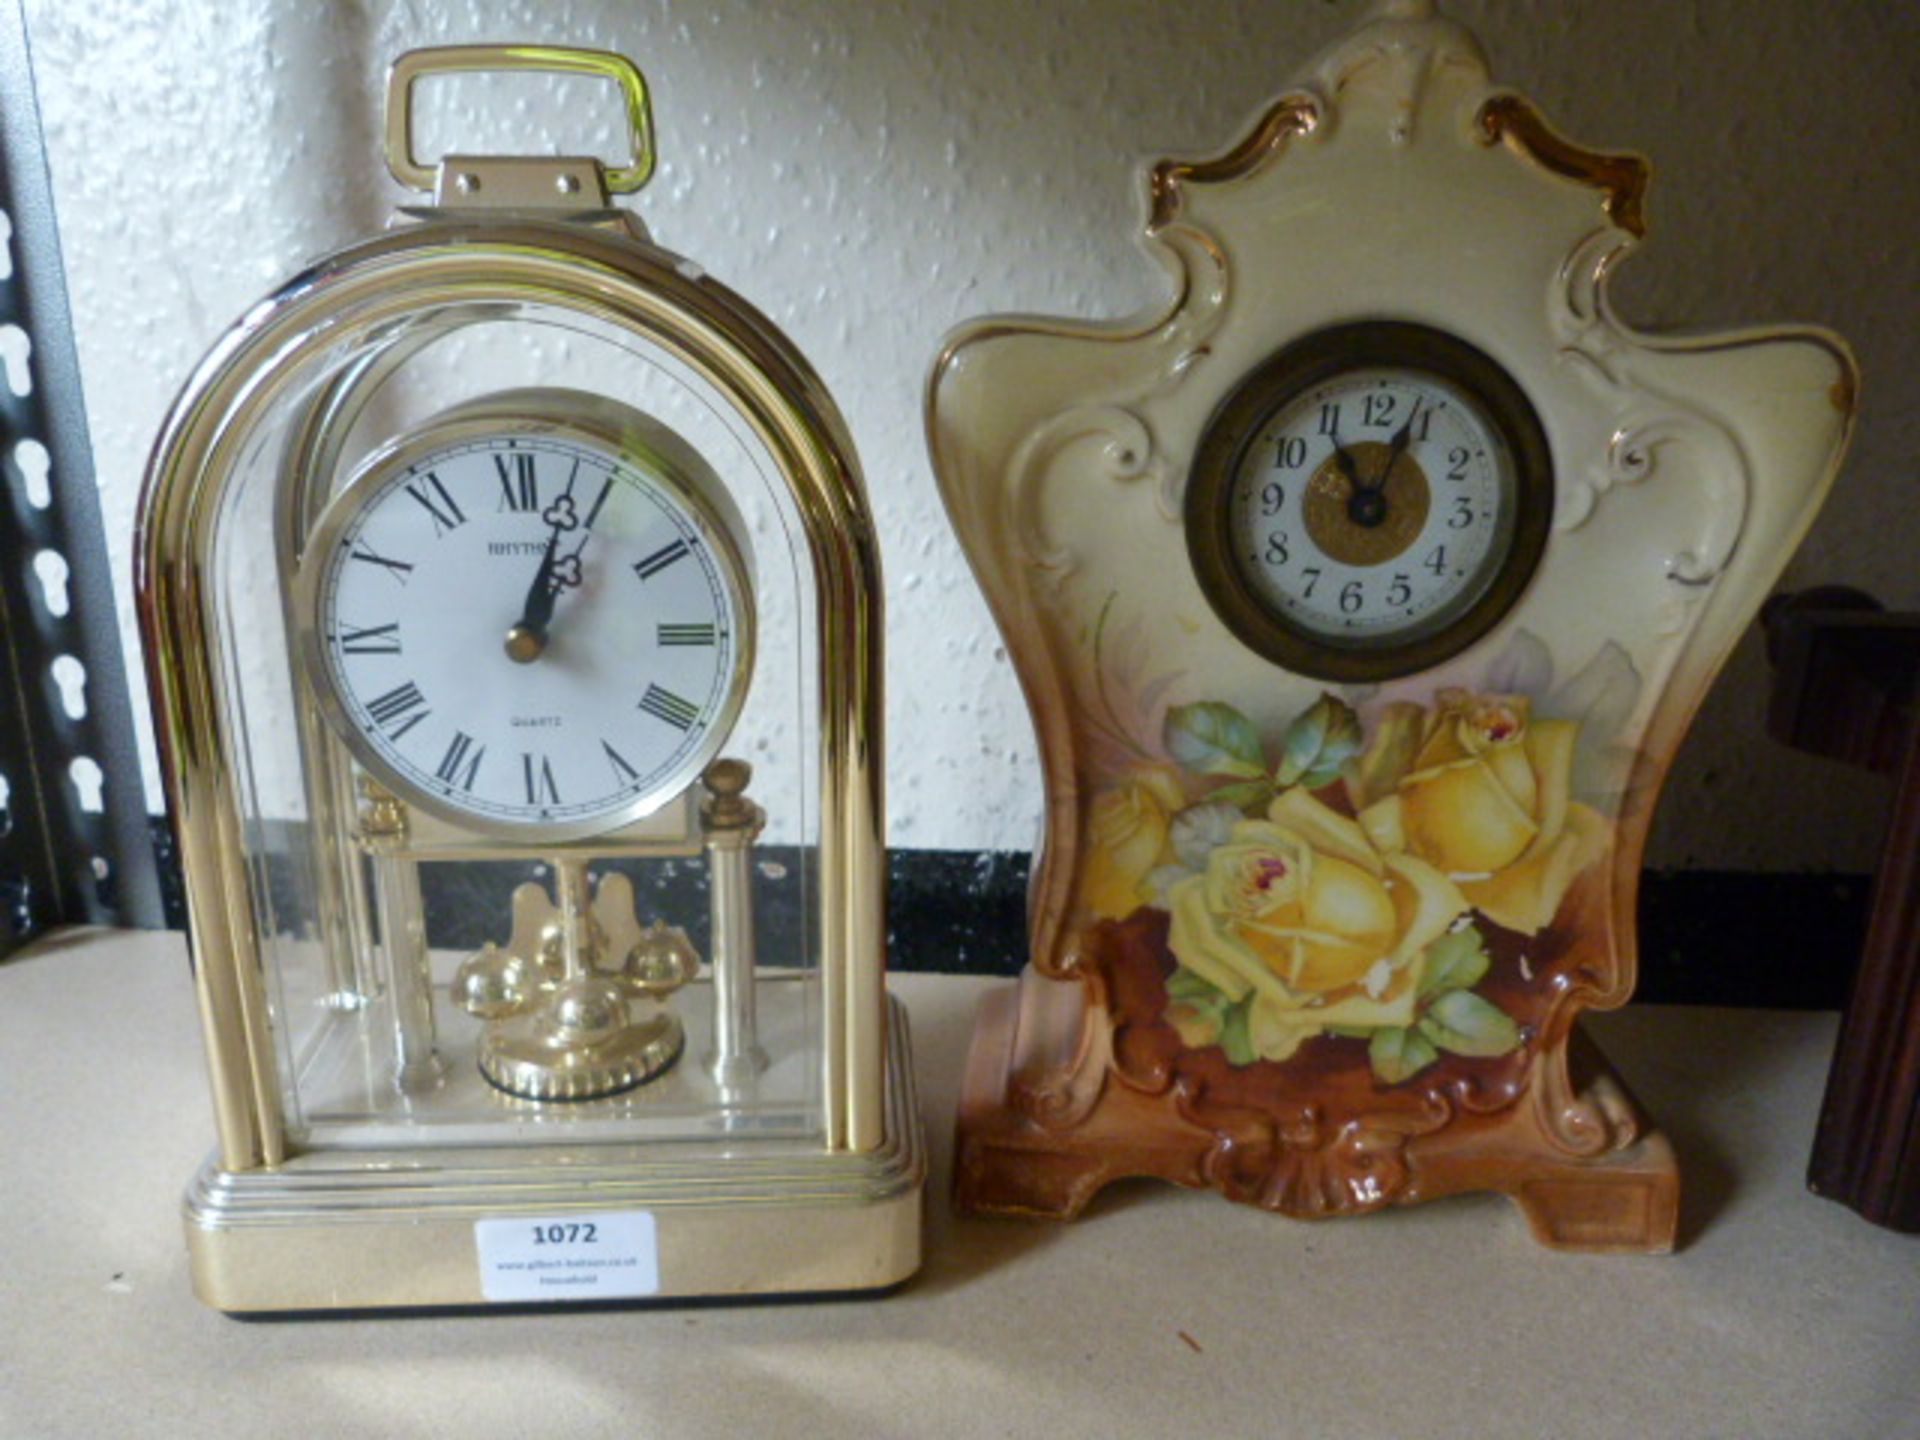 Brass Effect Plastic Domed Clock and a Decorative Glazed Floral Clock